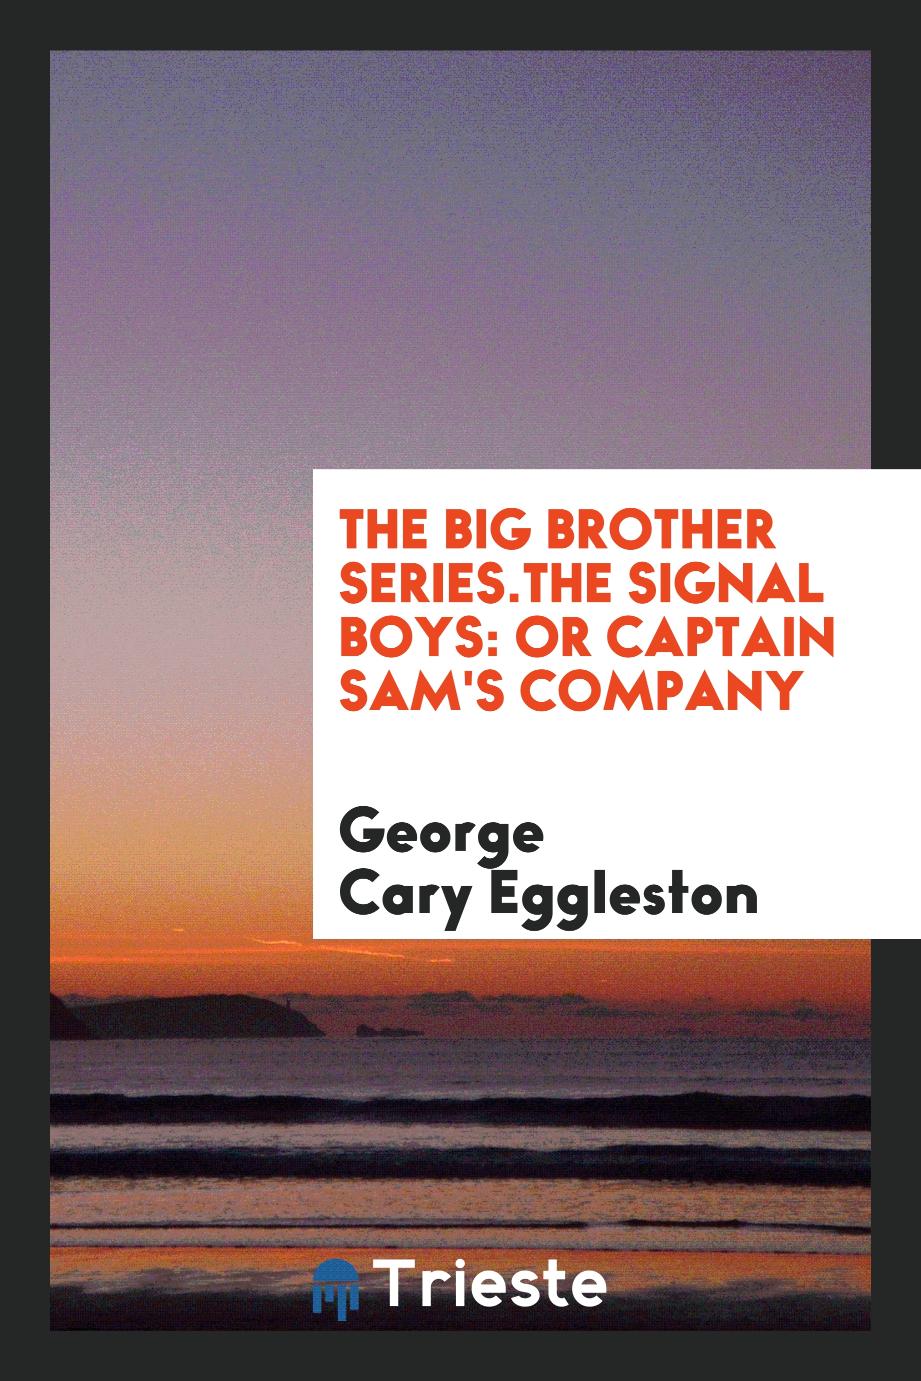 The Big Brother Series.The Signal Boys: Or Captain Sam's Company